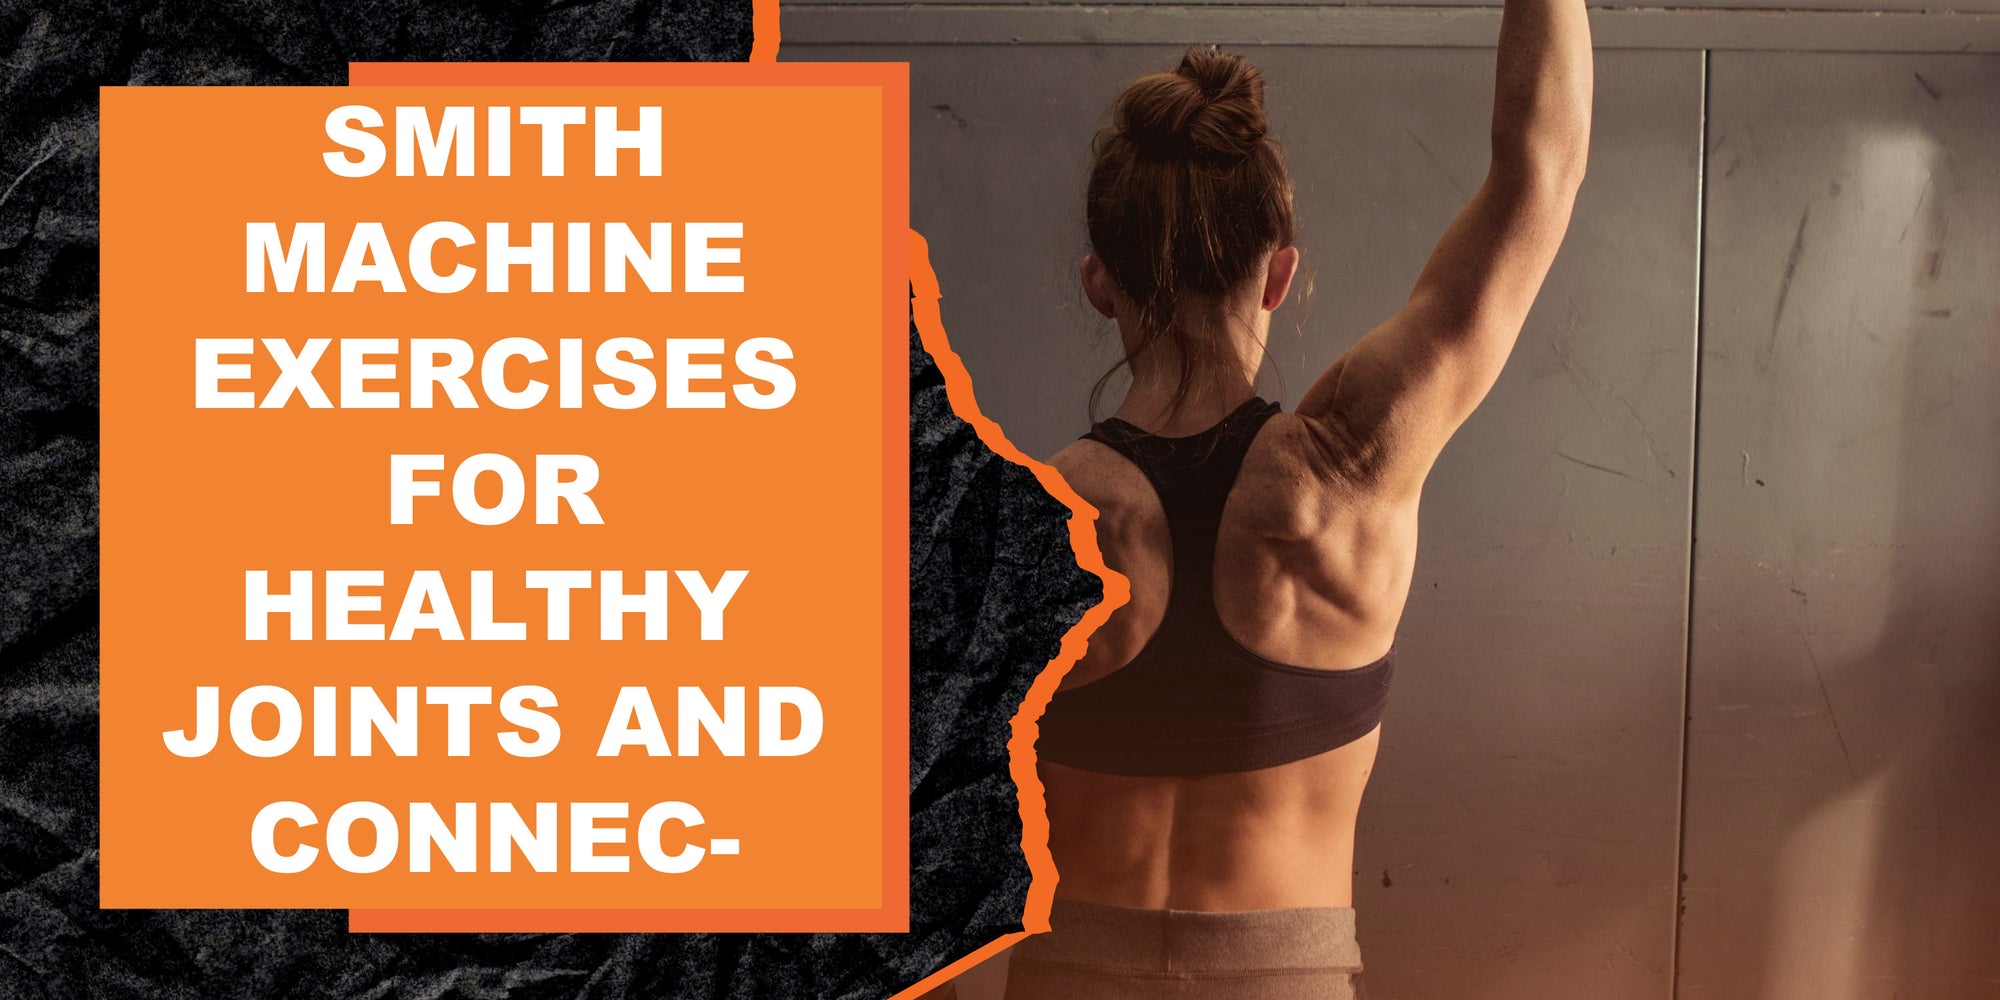 Smith Machine Exercises for Healthy Joints and Connective Tissue